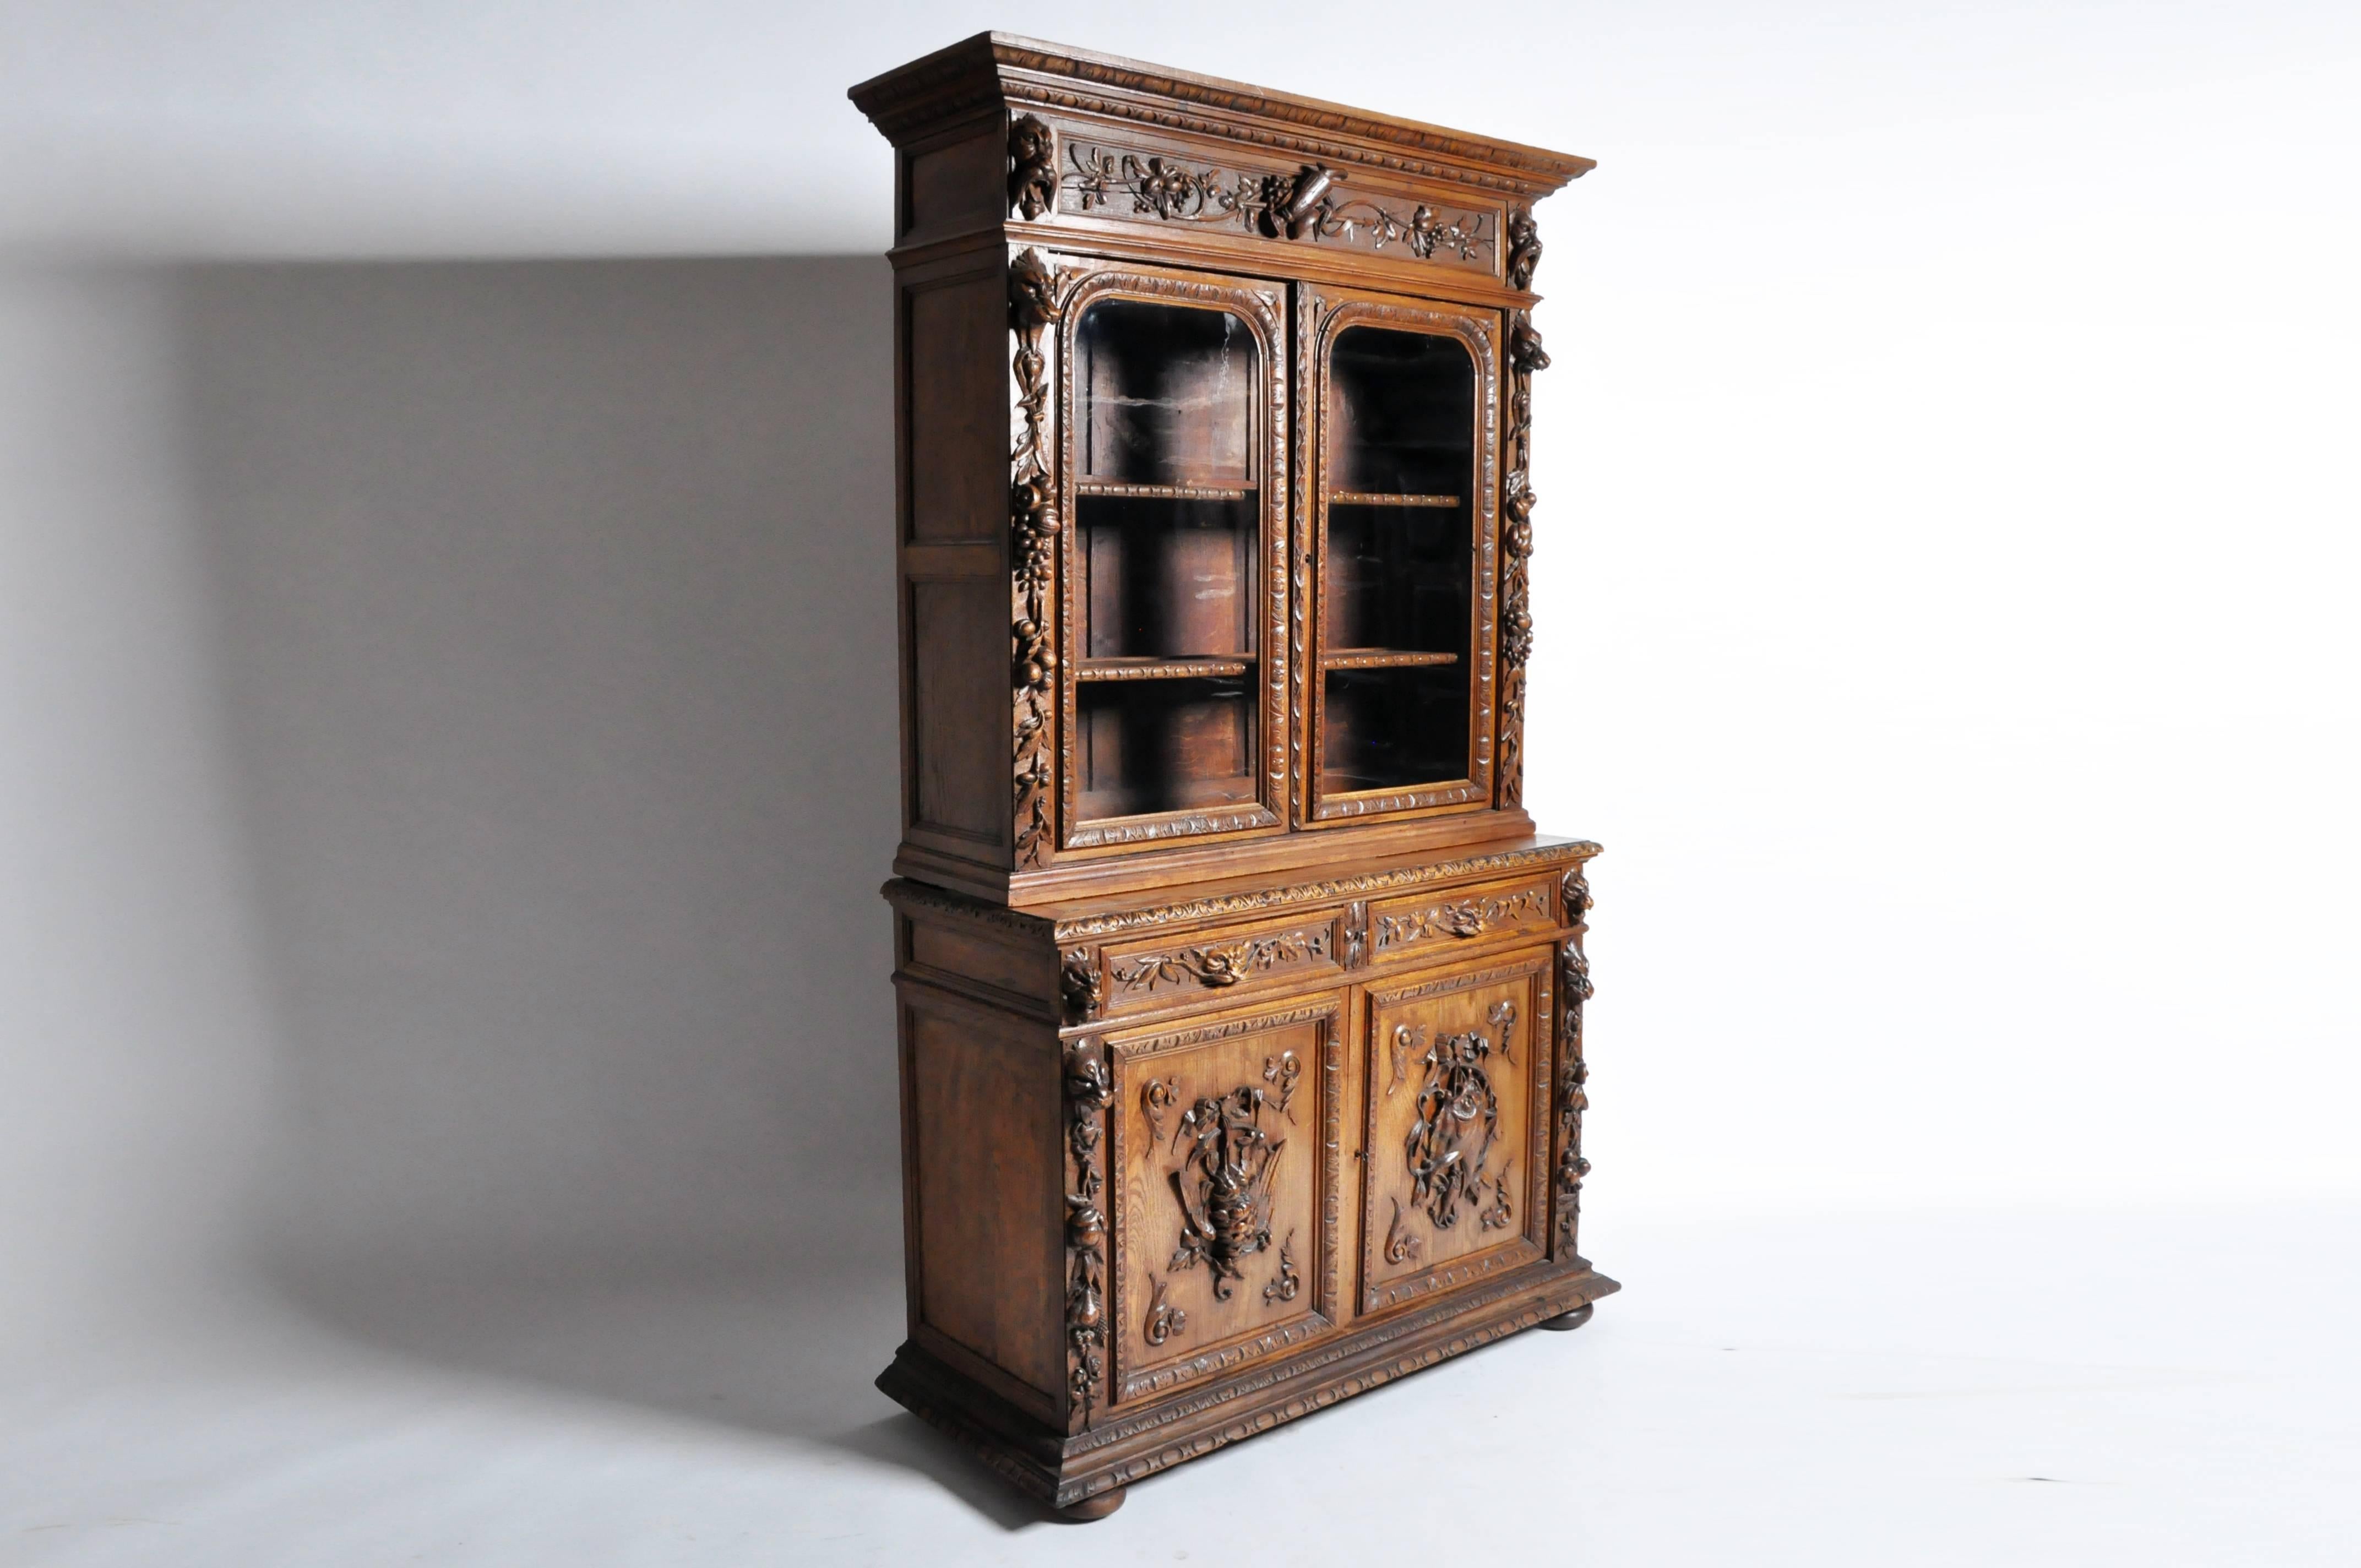 As opulent as it is well-made, this massive oak cabinet hails from Northern France and was likely commissioned during the mid-late 1800s when the vogue for the hunting style in Europe underwent a revival. Featuring intricately hand-carved harvest